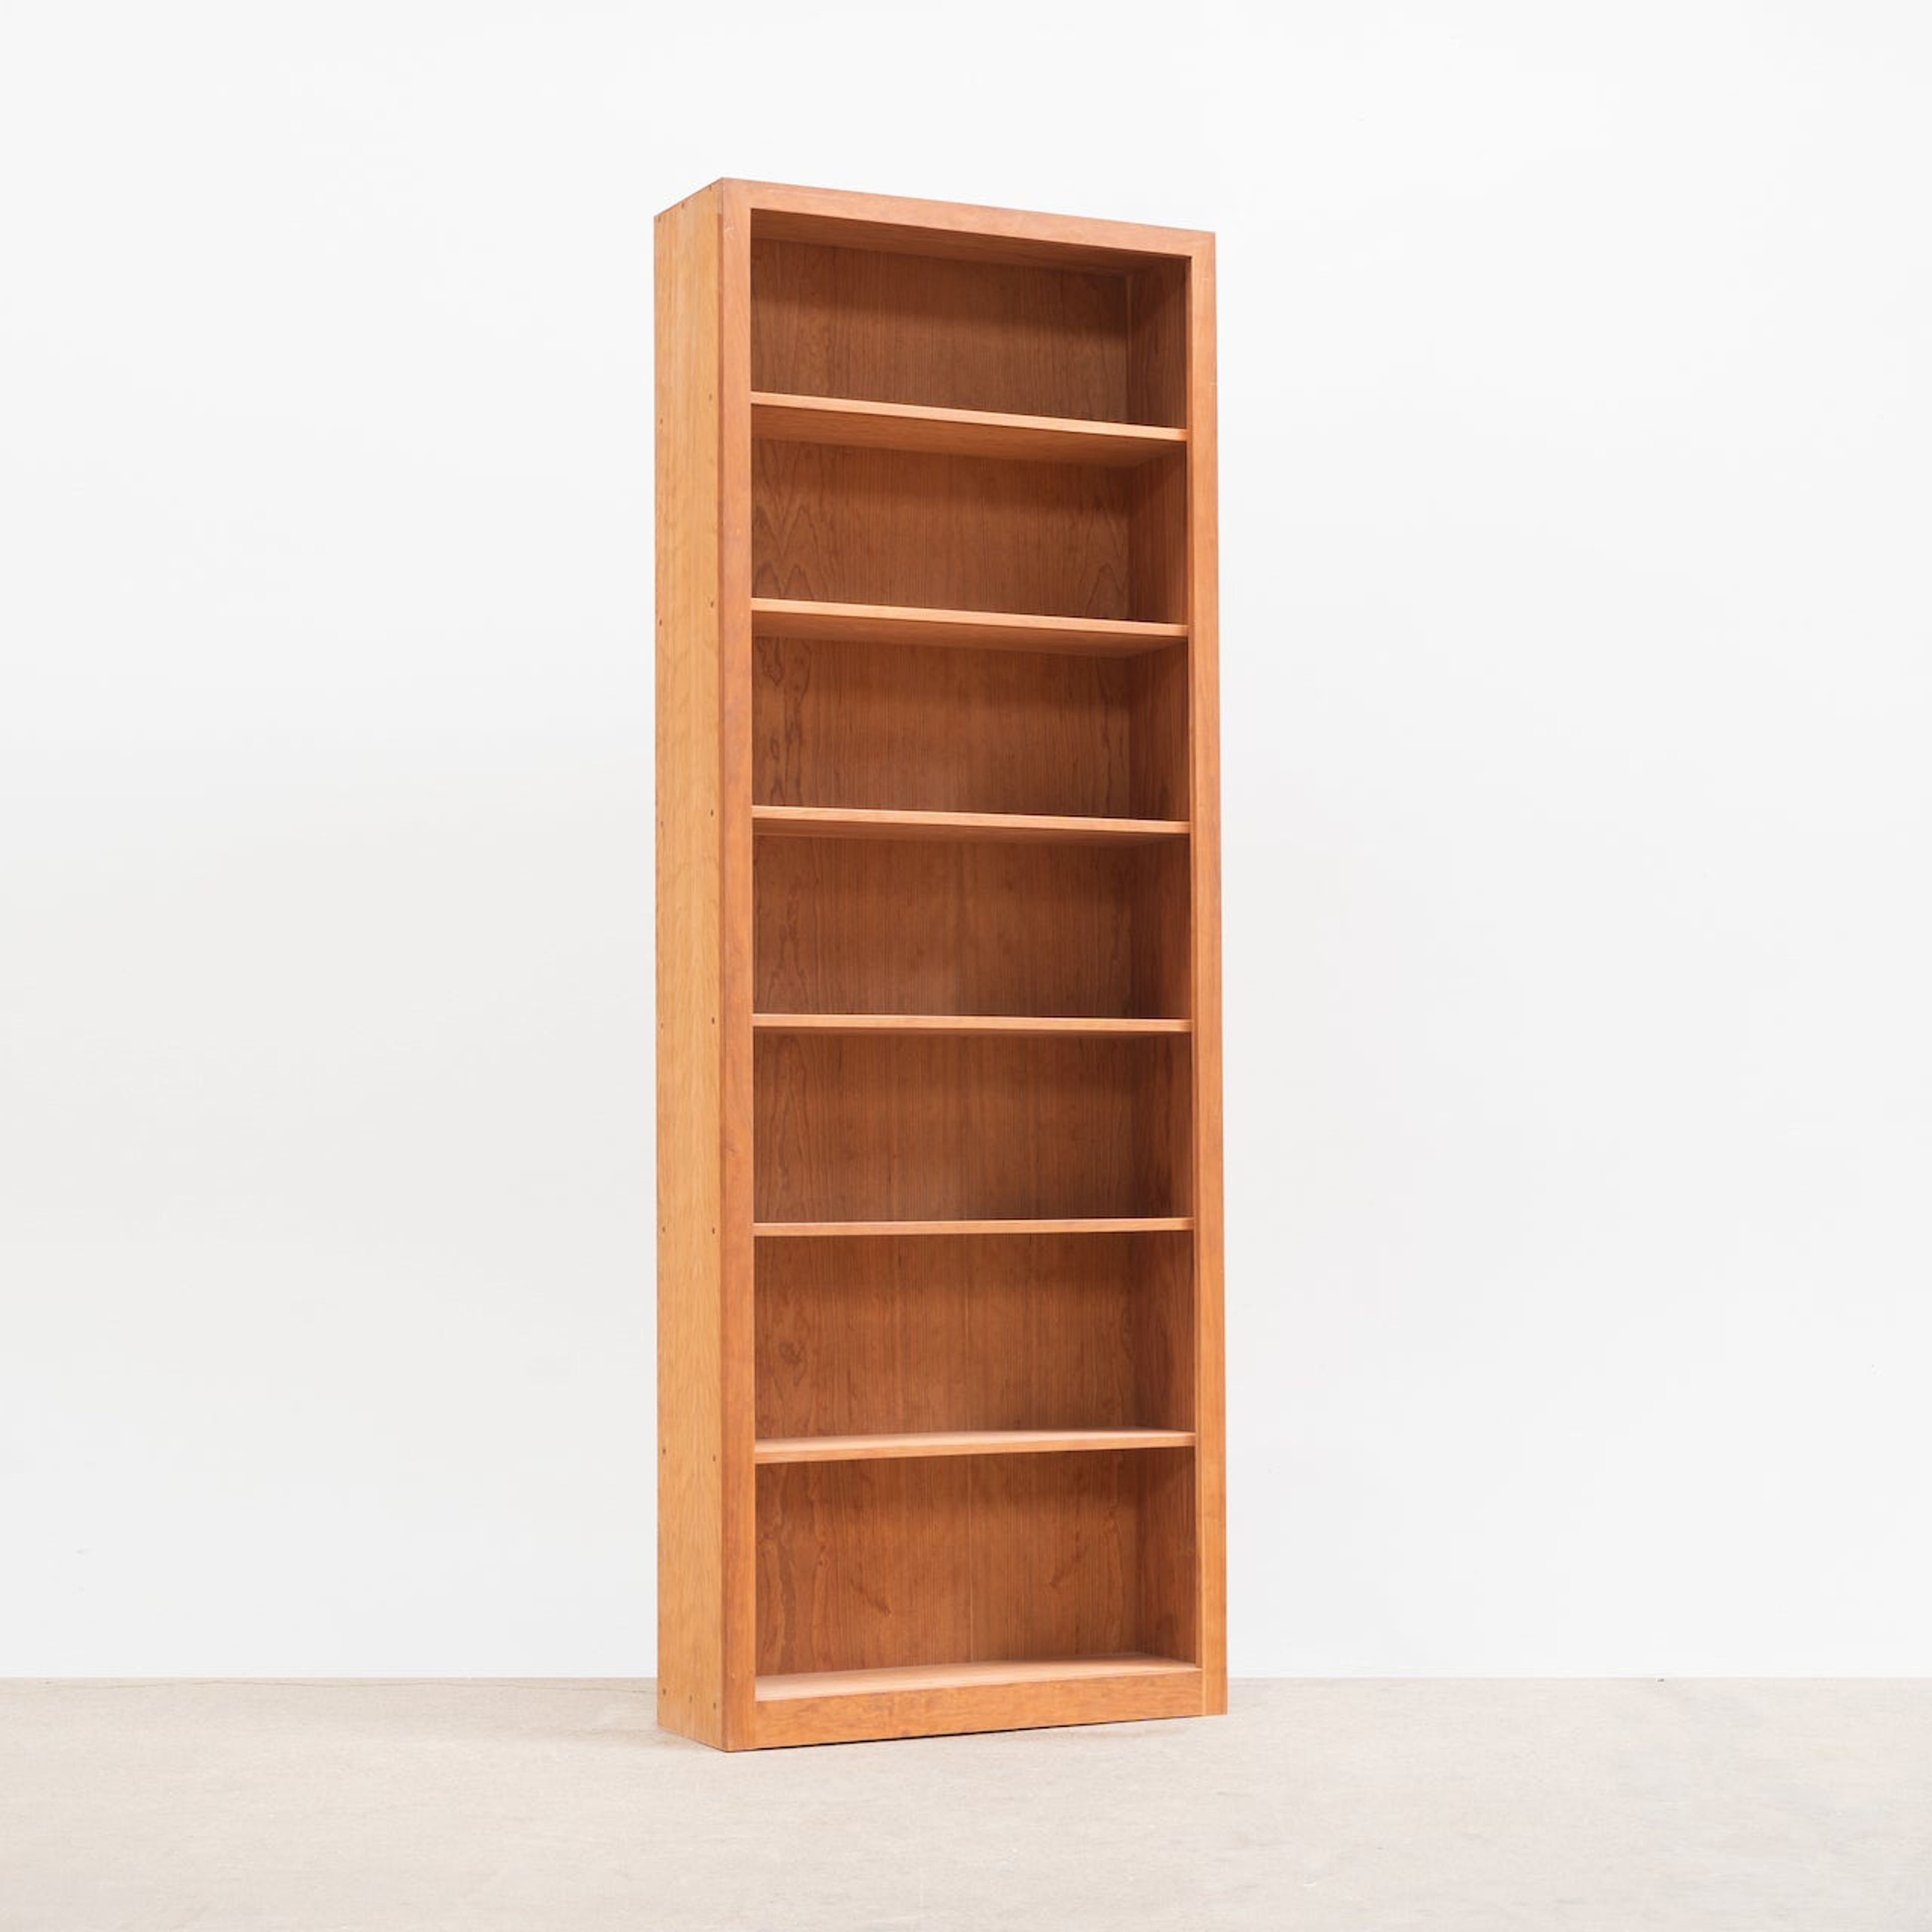 7 Space Cherry Fixed Bookcase